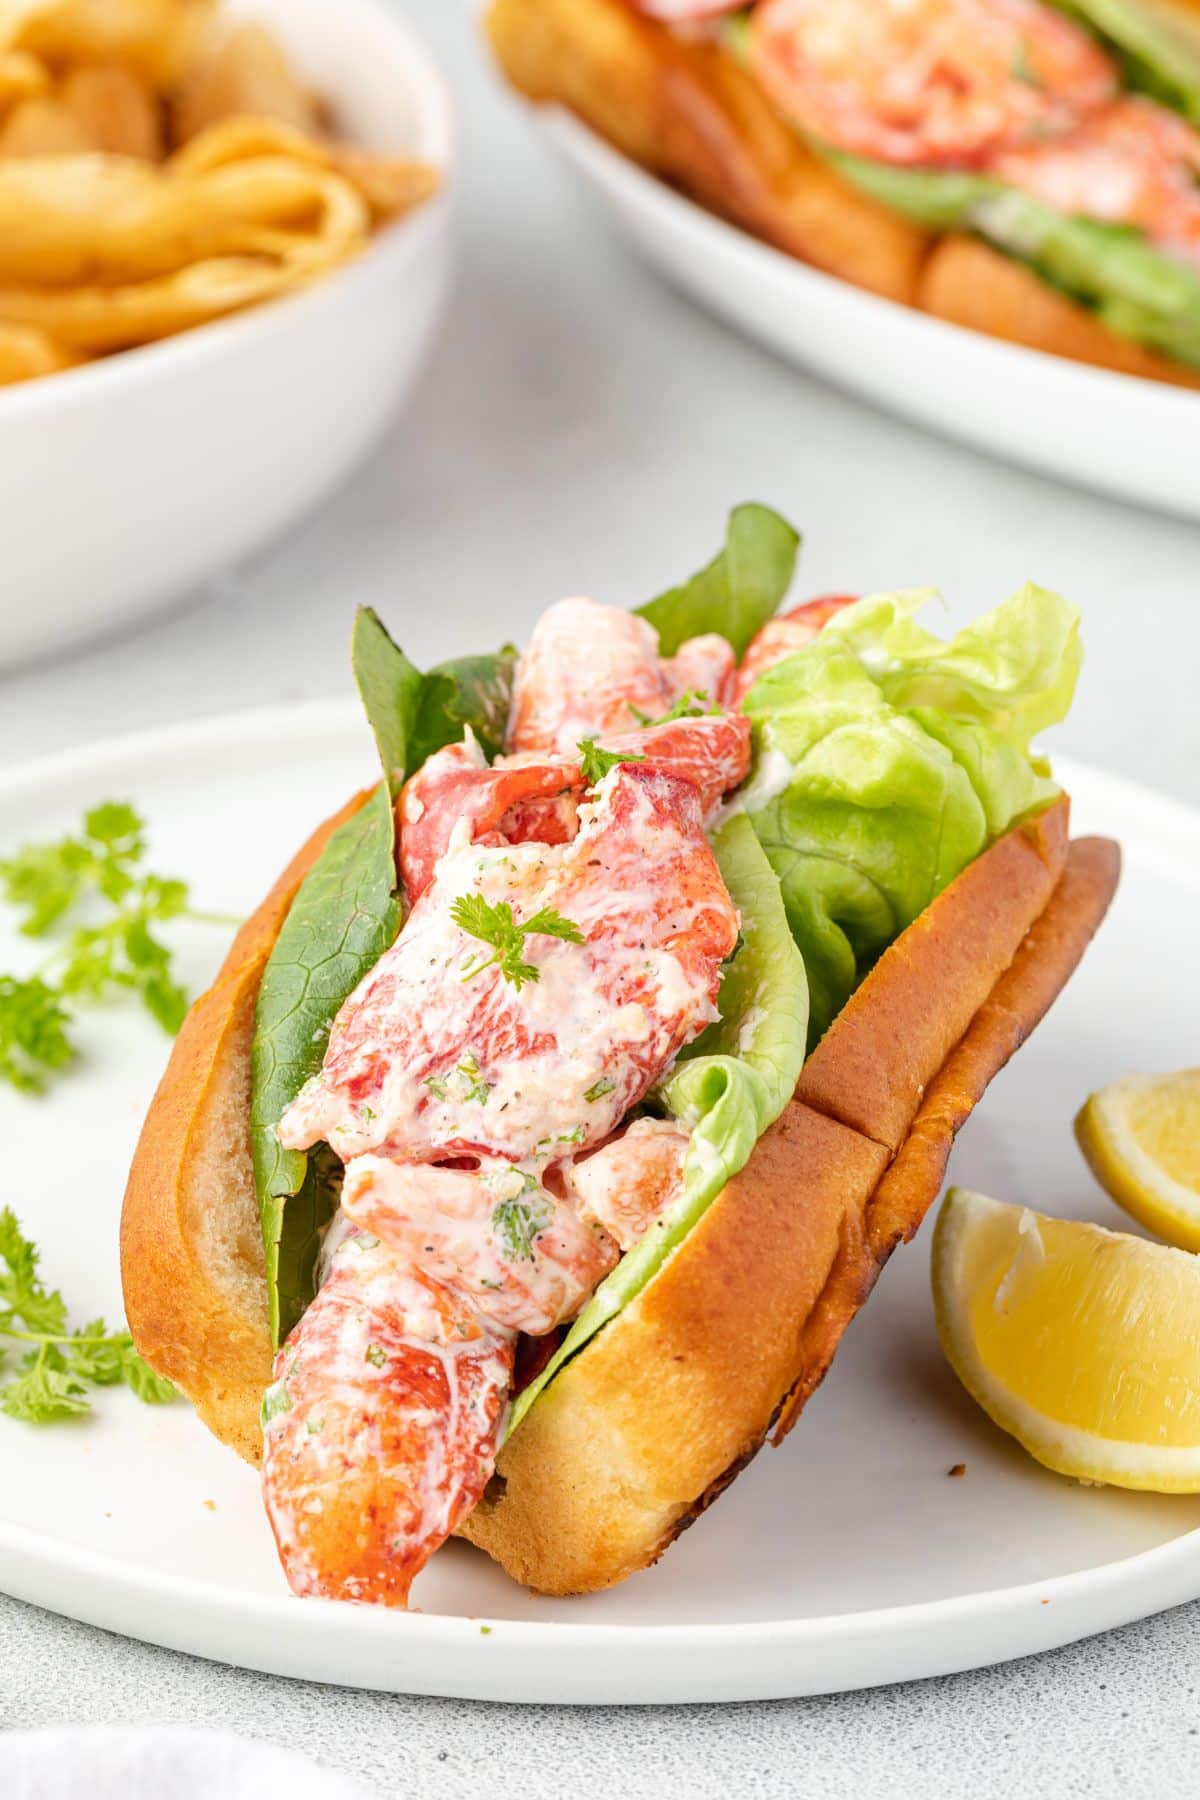 Mayo coated lobster pieces in a bun lined with lettuce, on a plate with lemon wedges.